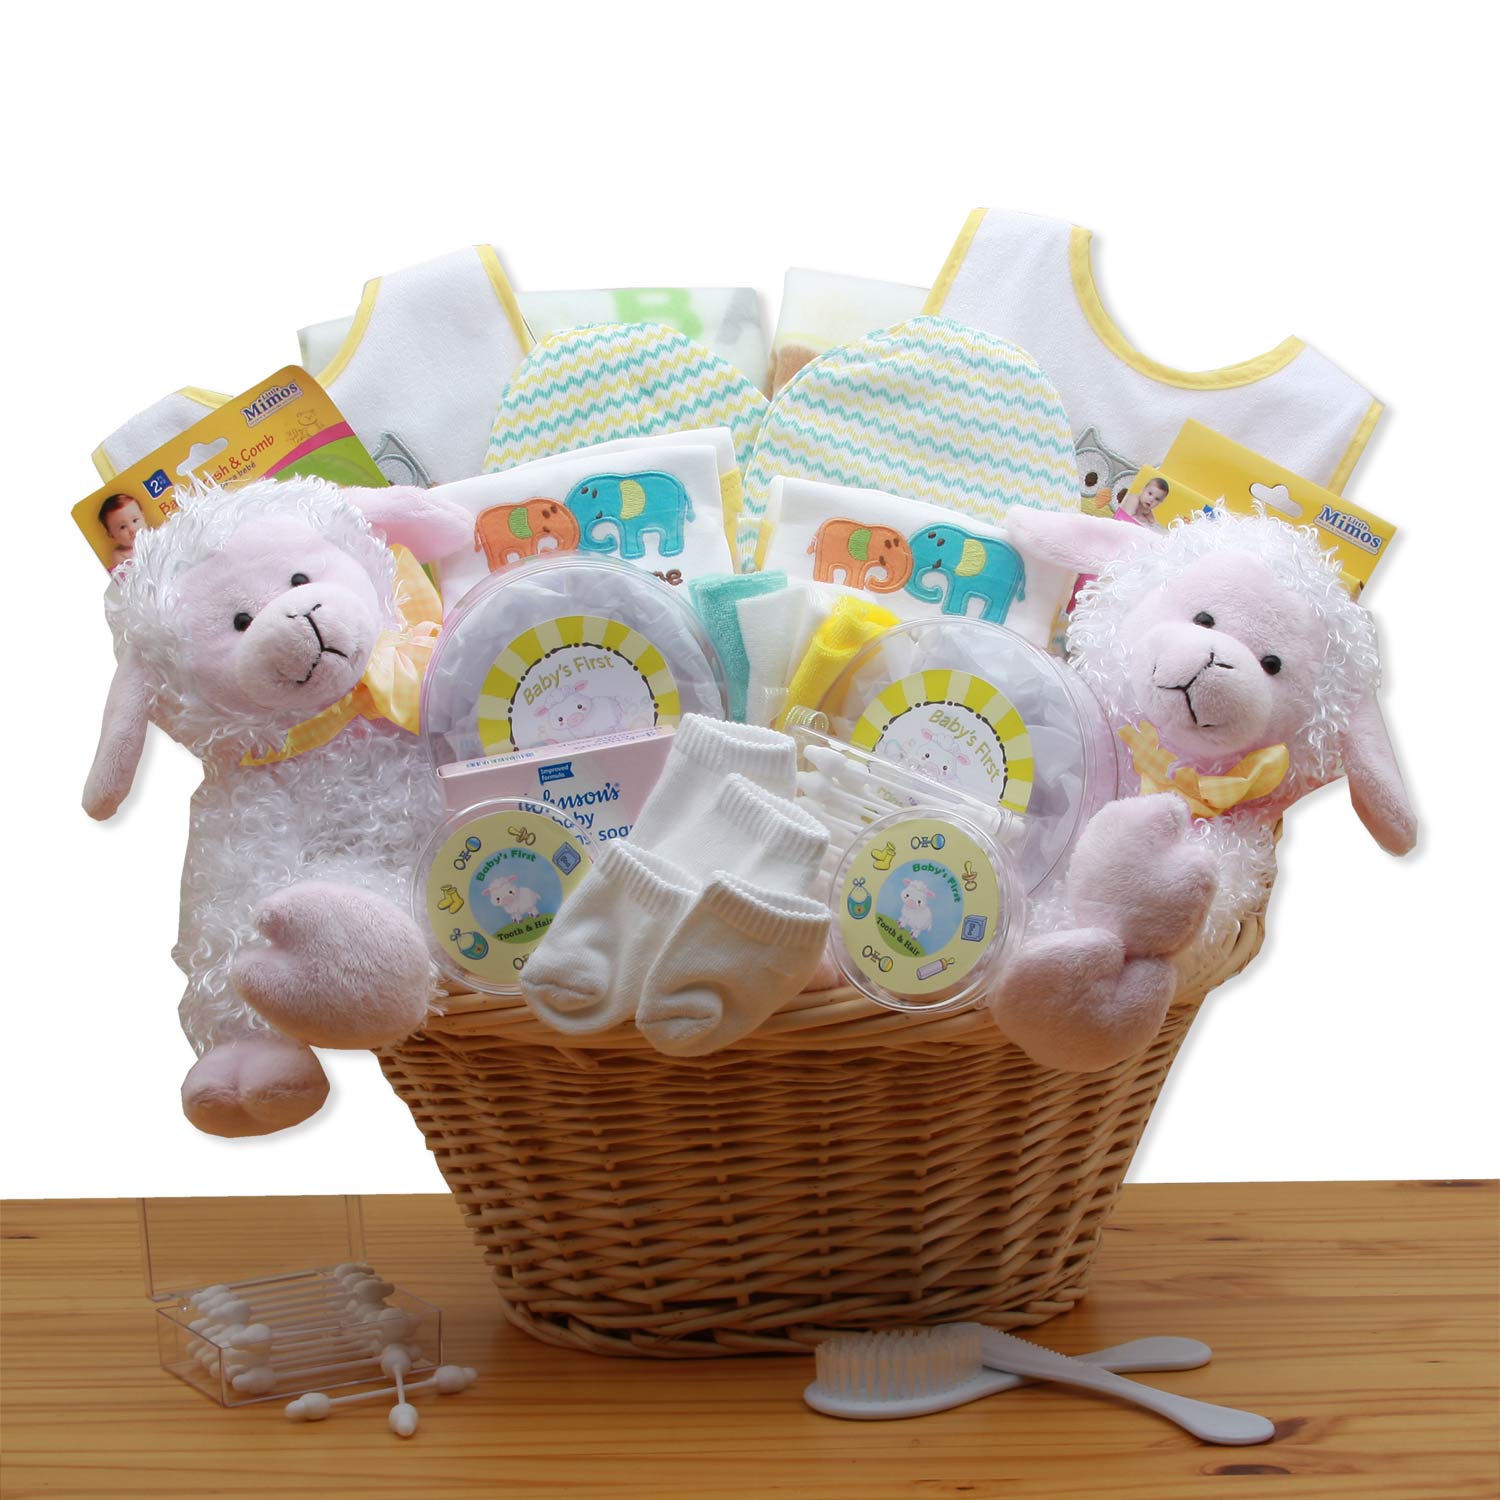 Double Delight Twins New Baby Gift Basket - Yellow Flower Bouquet